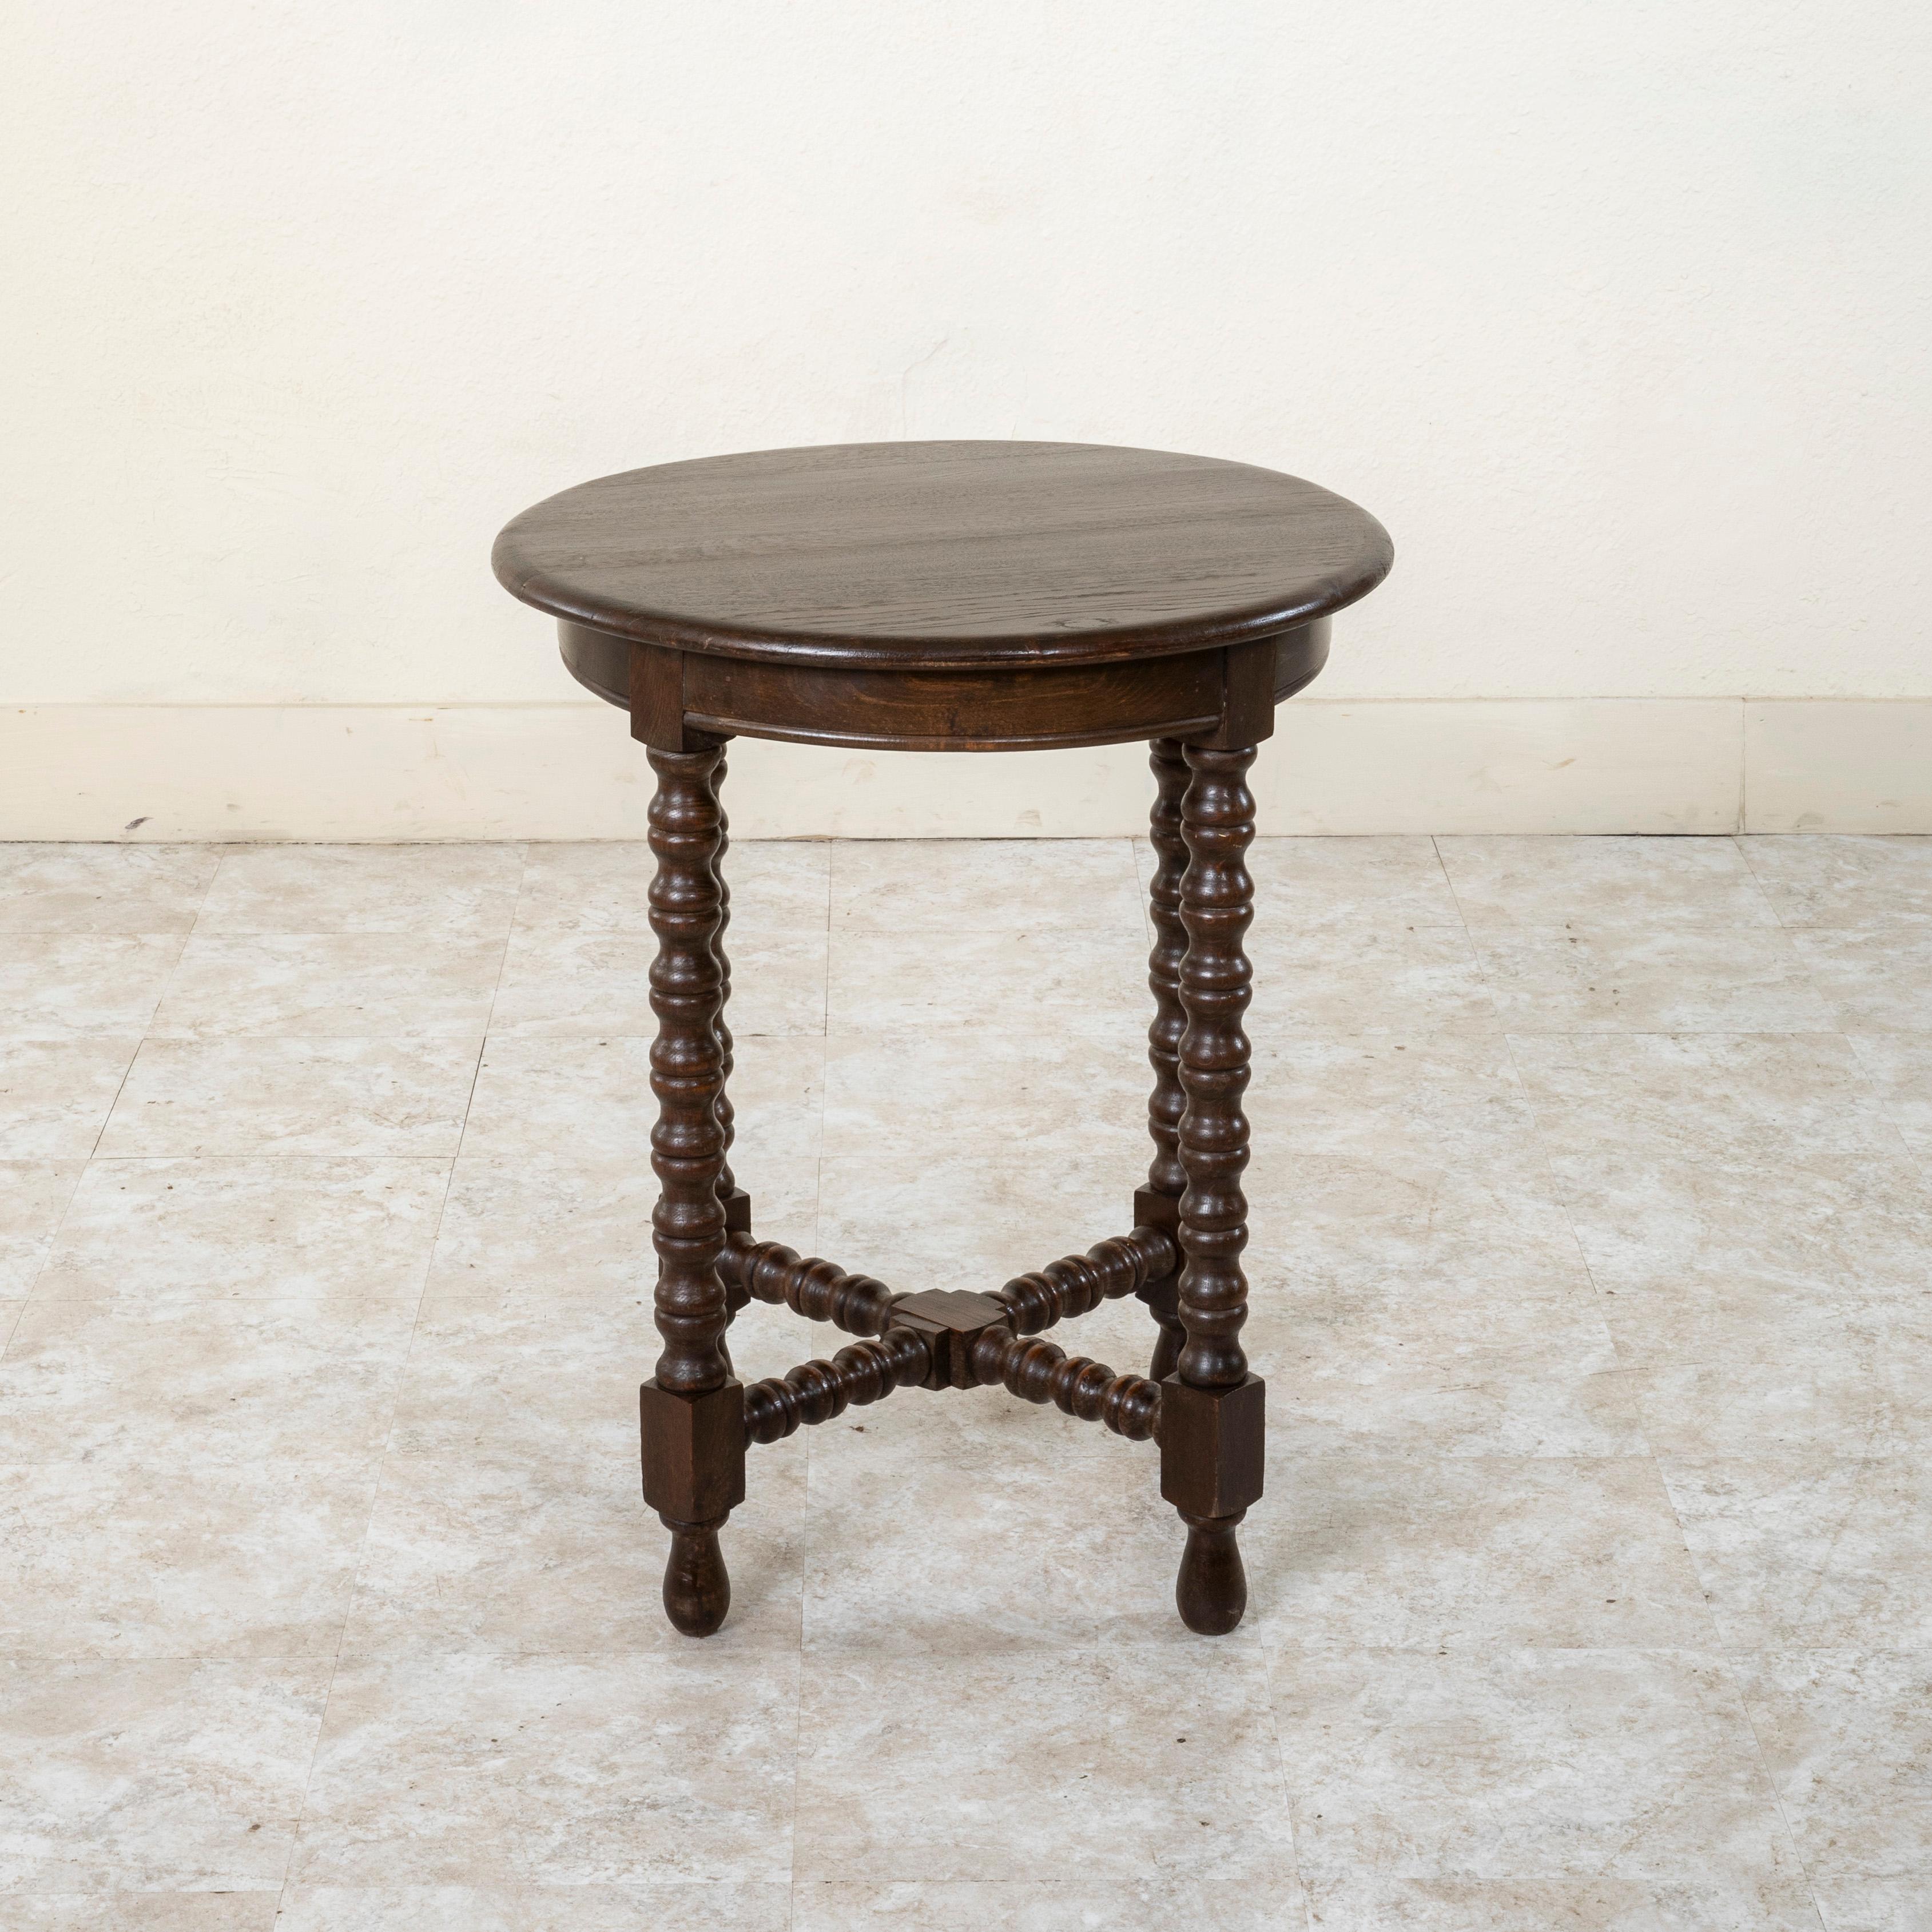 This French oak side table from the turn of the twentieth century features four turned legs joined by a lower X stretcher. Its sturdy base supports a 23.5 inch diameter beveled top. A handsome table to place beside a chair or between two chairs. c.